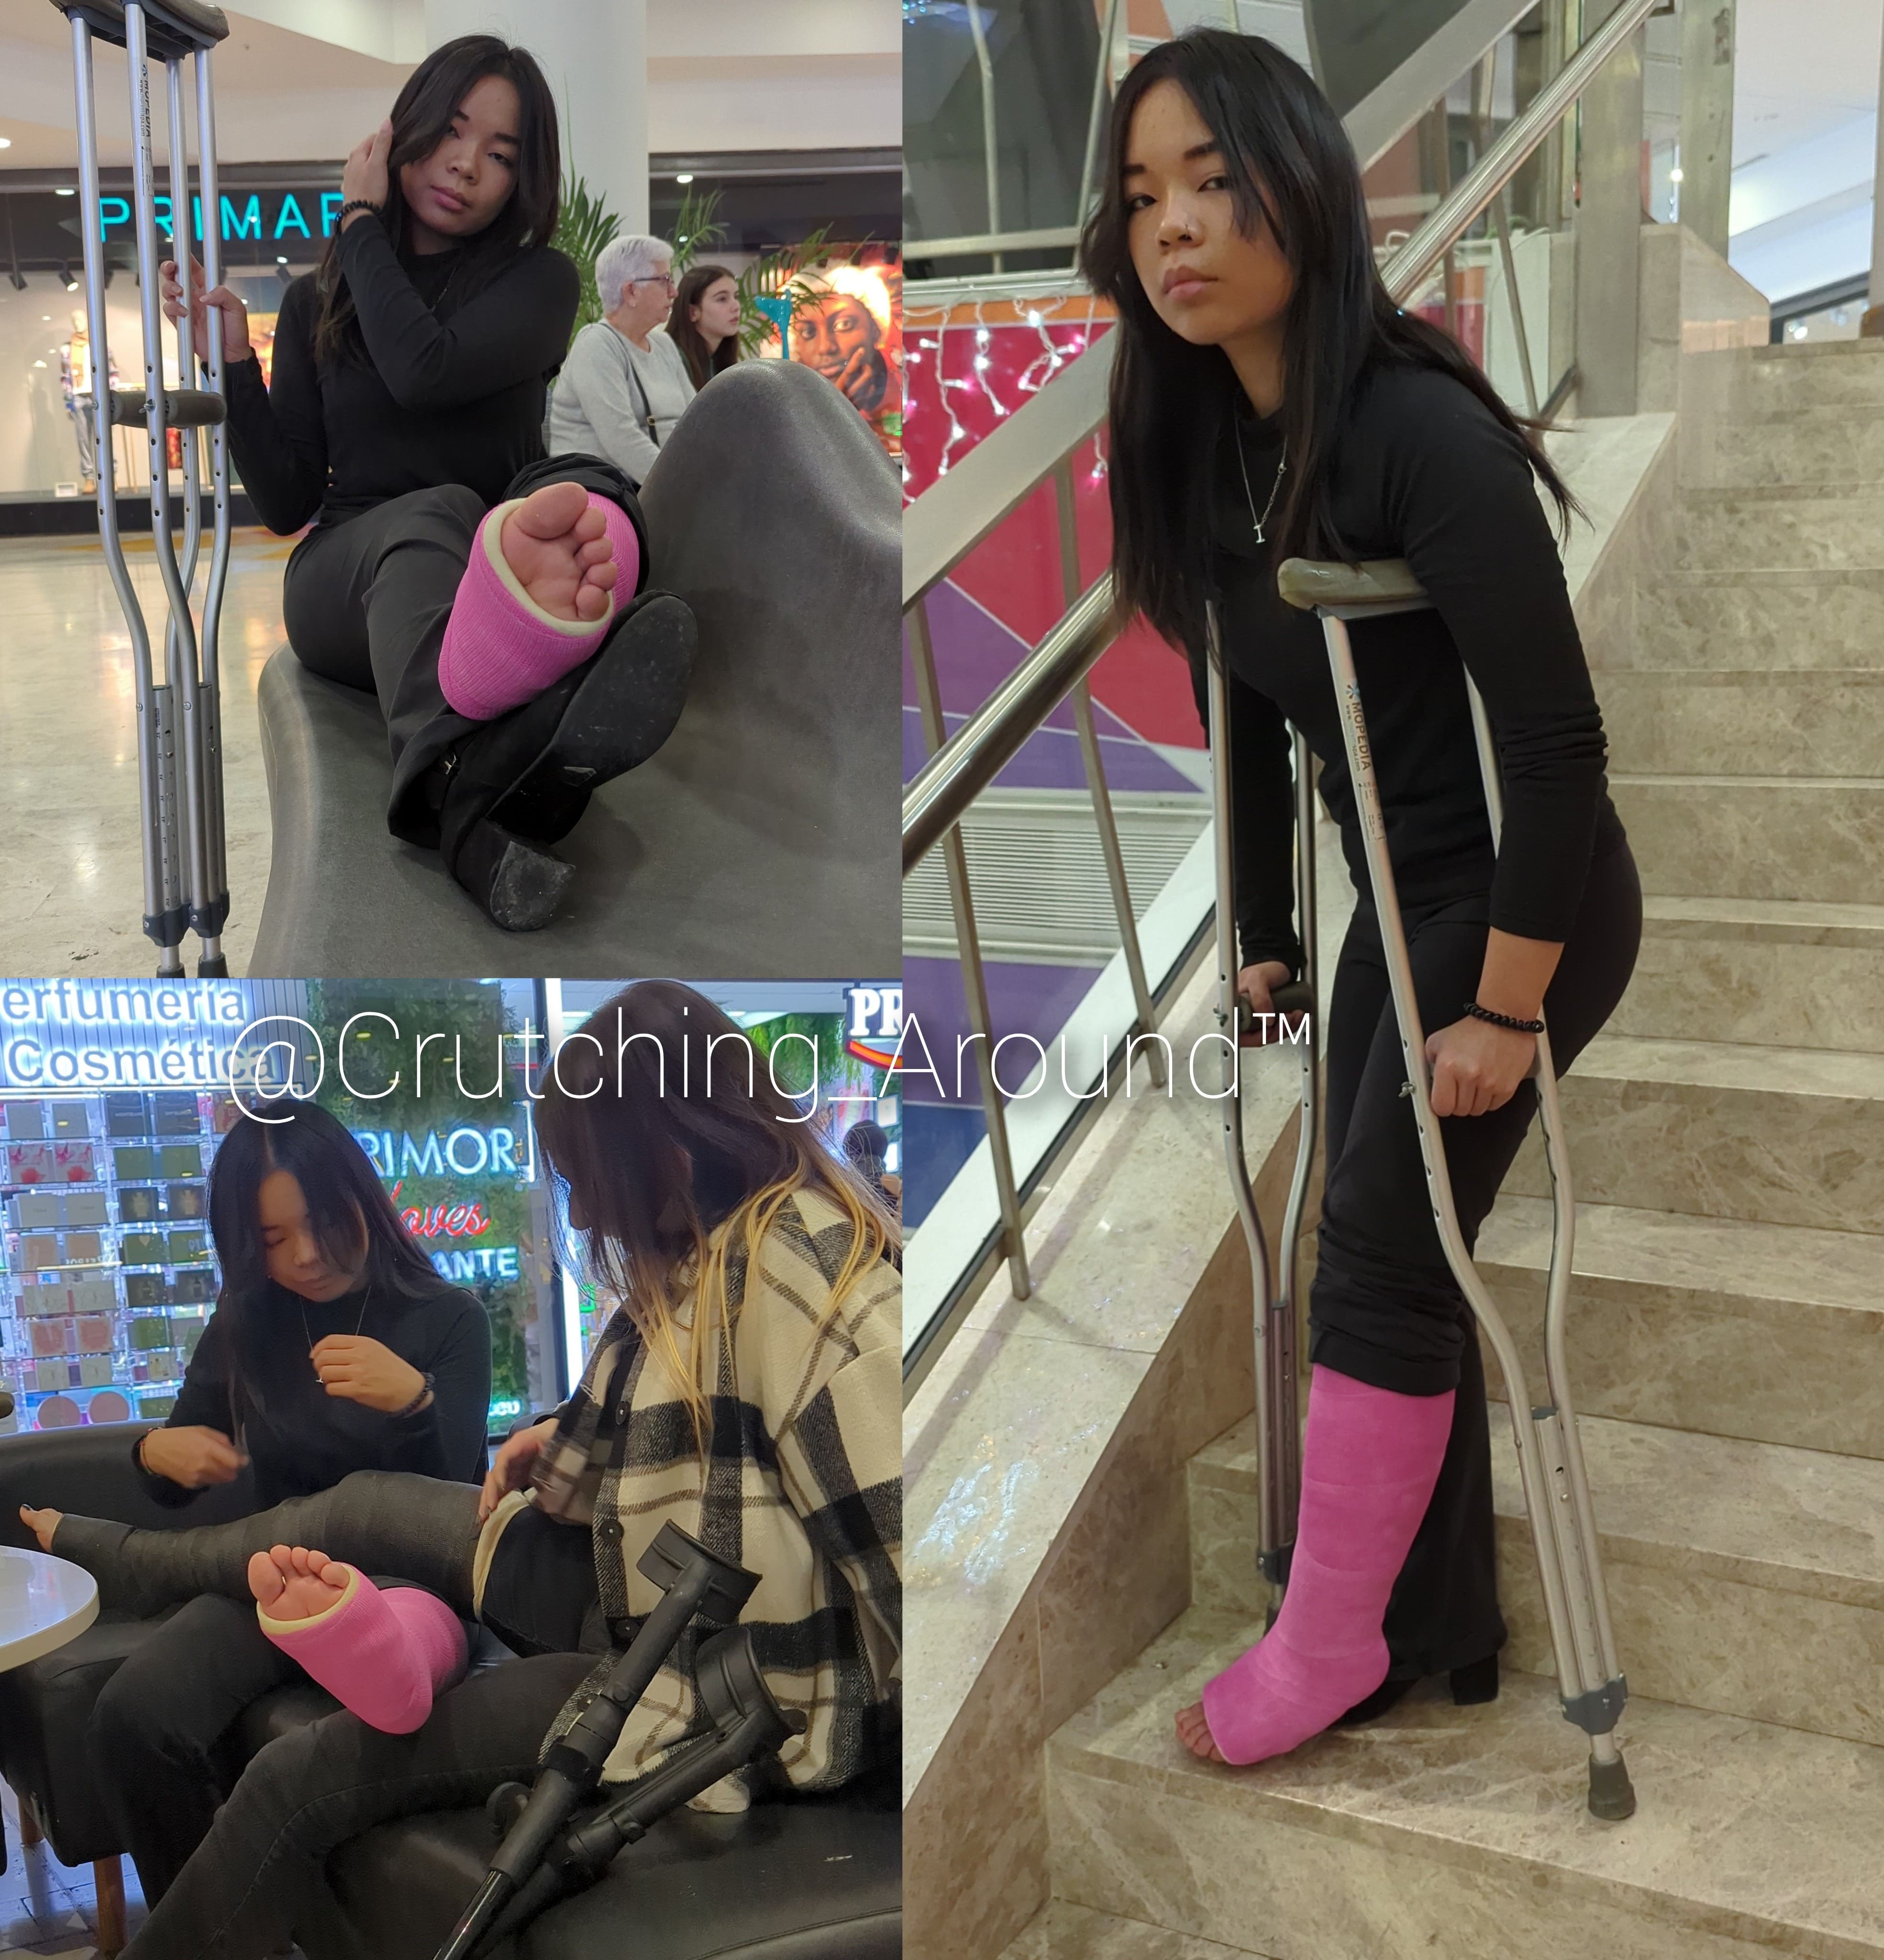 SLC mall crutching! Waiting for her casted friend! -Bel -